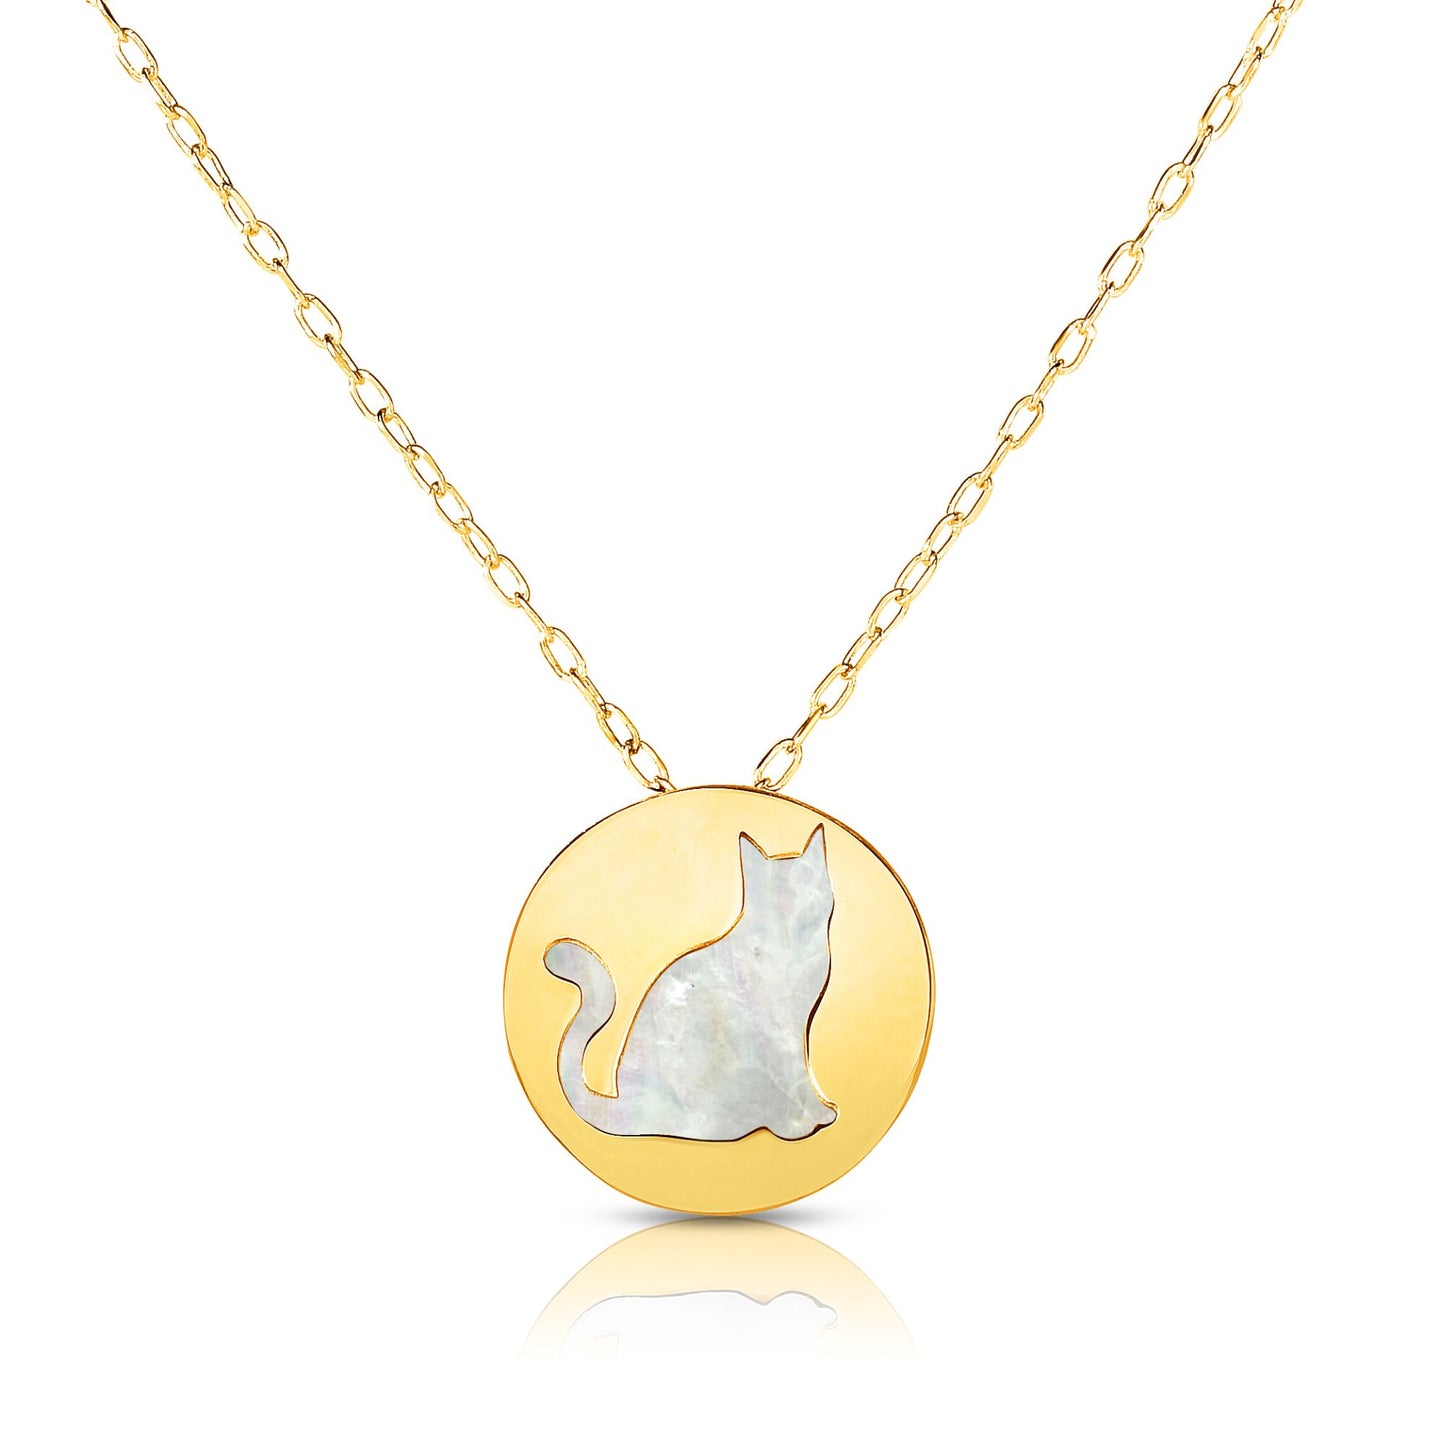 14K Gold Cat Charm Pendant with Mother of Pearl Necklace